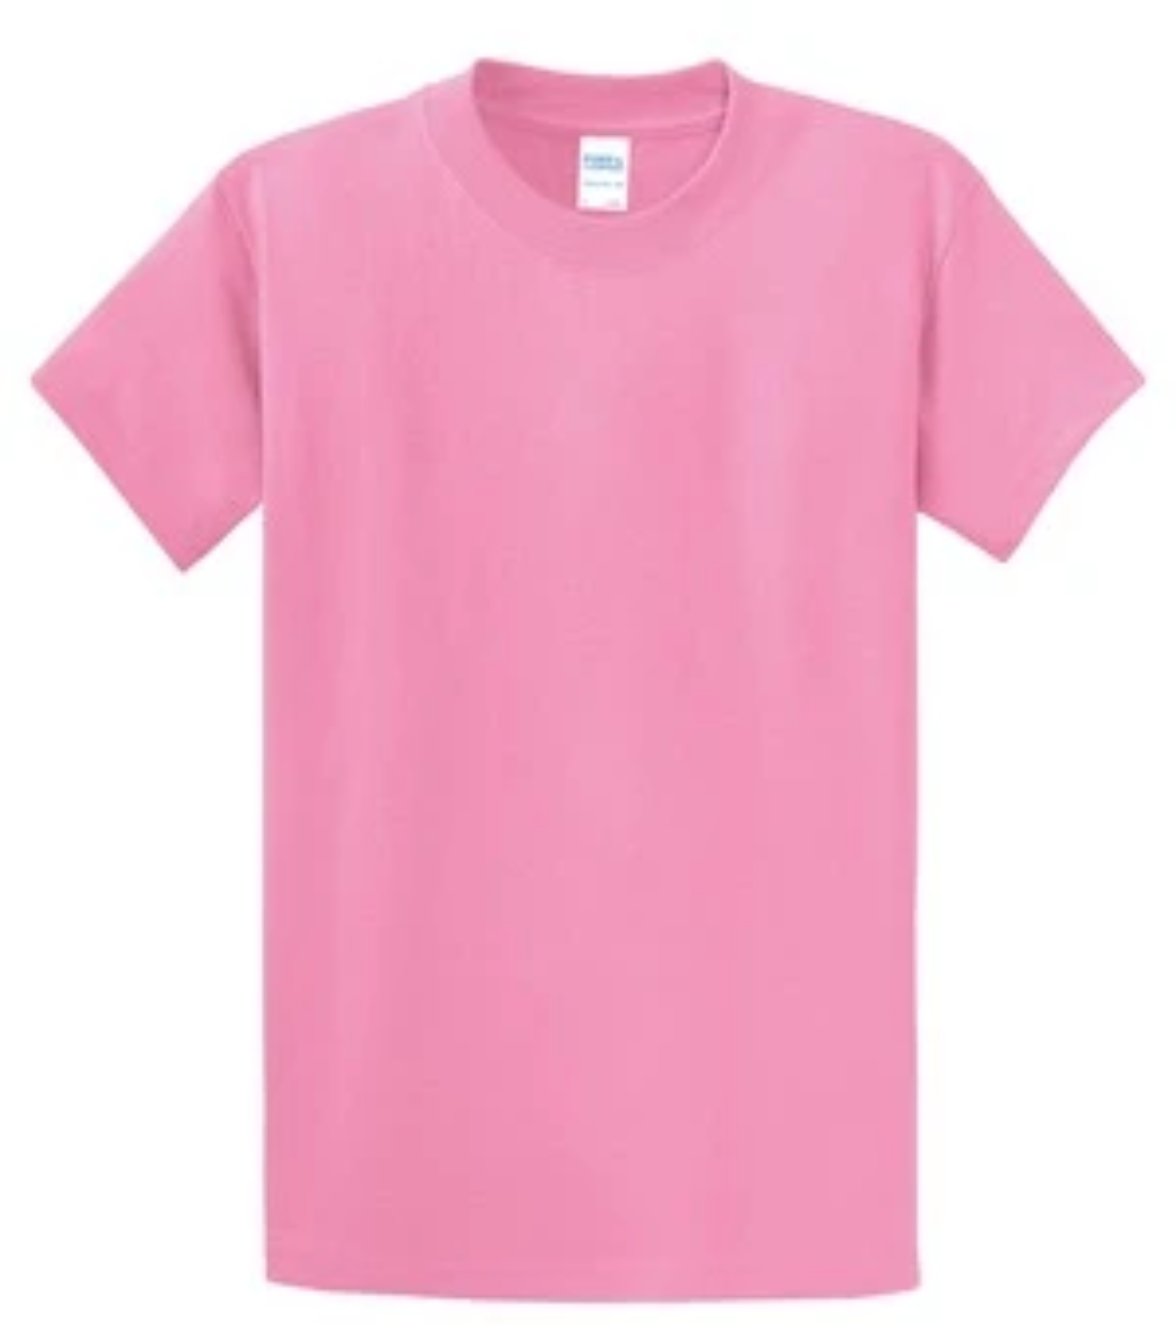 Port & Company 100% Cotton Essential T-Shirt Candy Pink Tall PC61T